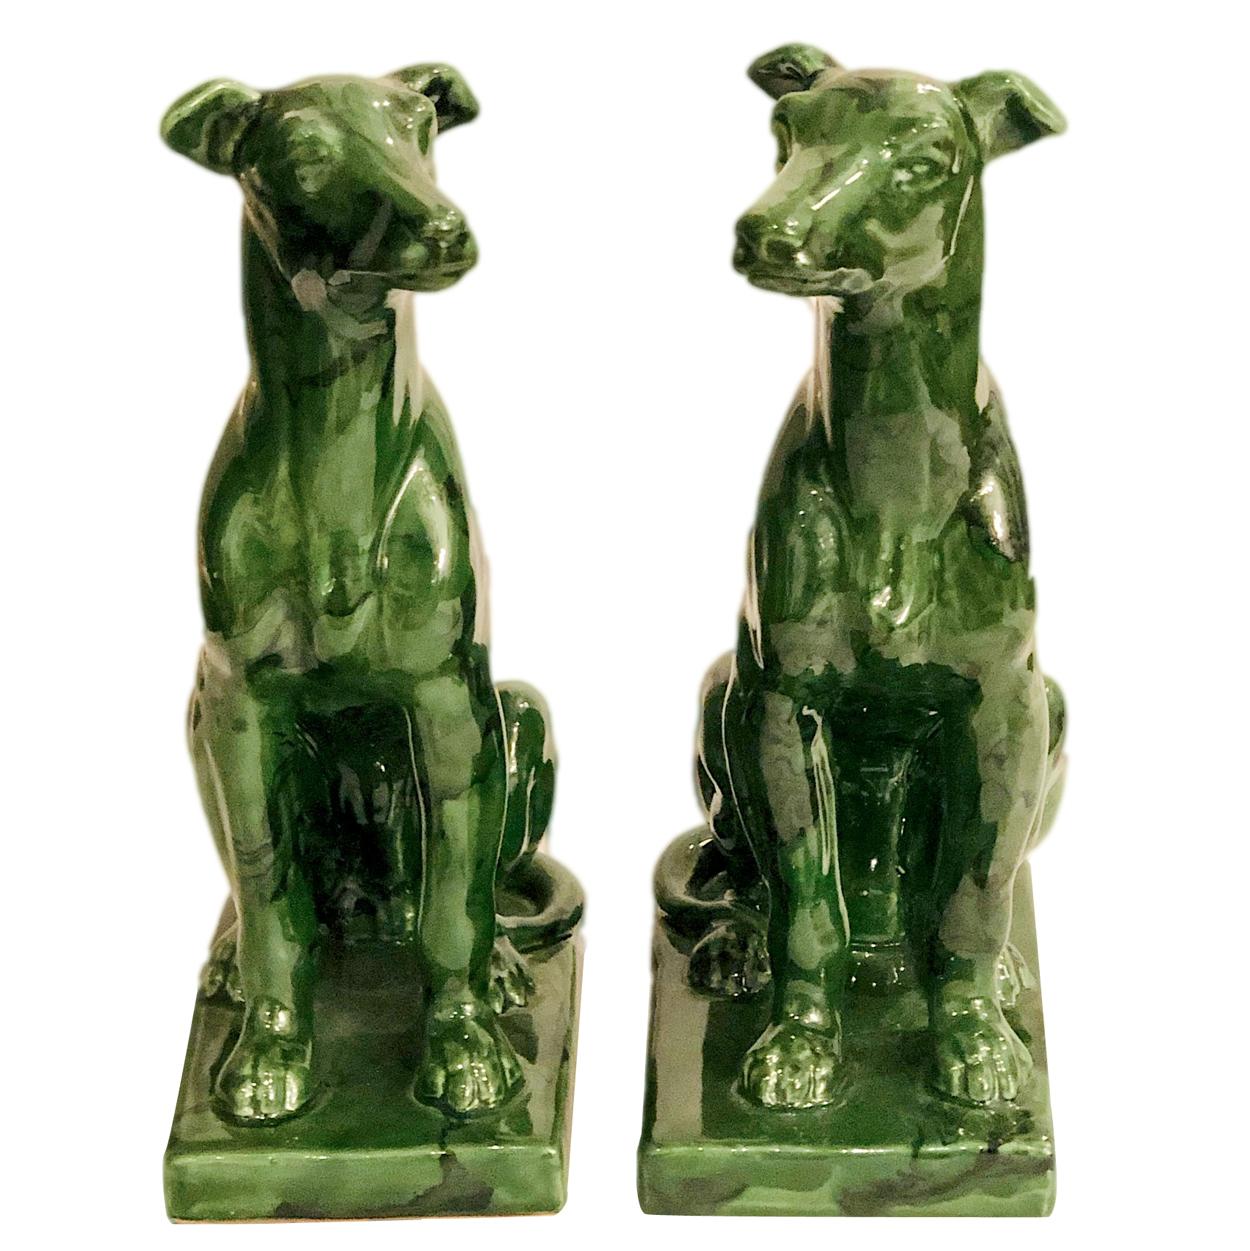 A pair of circa 1930's English green porcelain Whippet dogs.

Measurements:
Height: 11